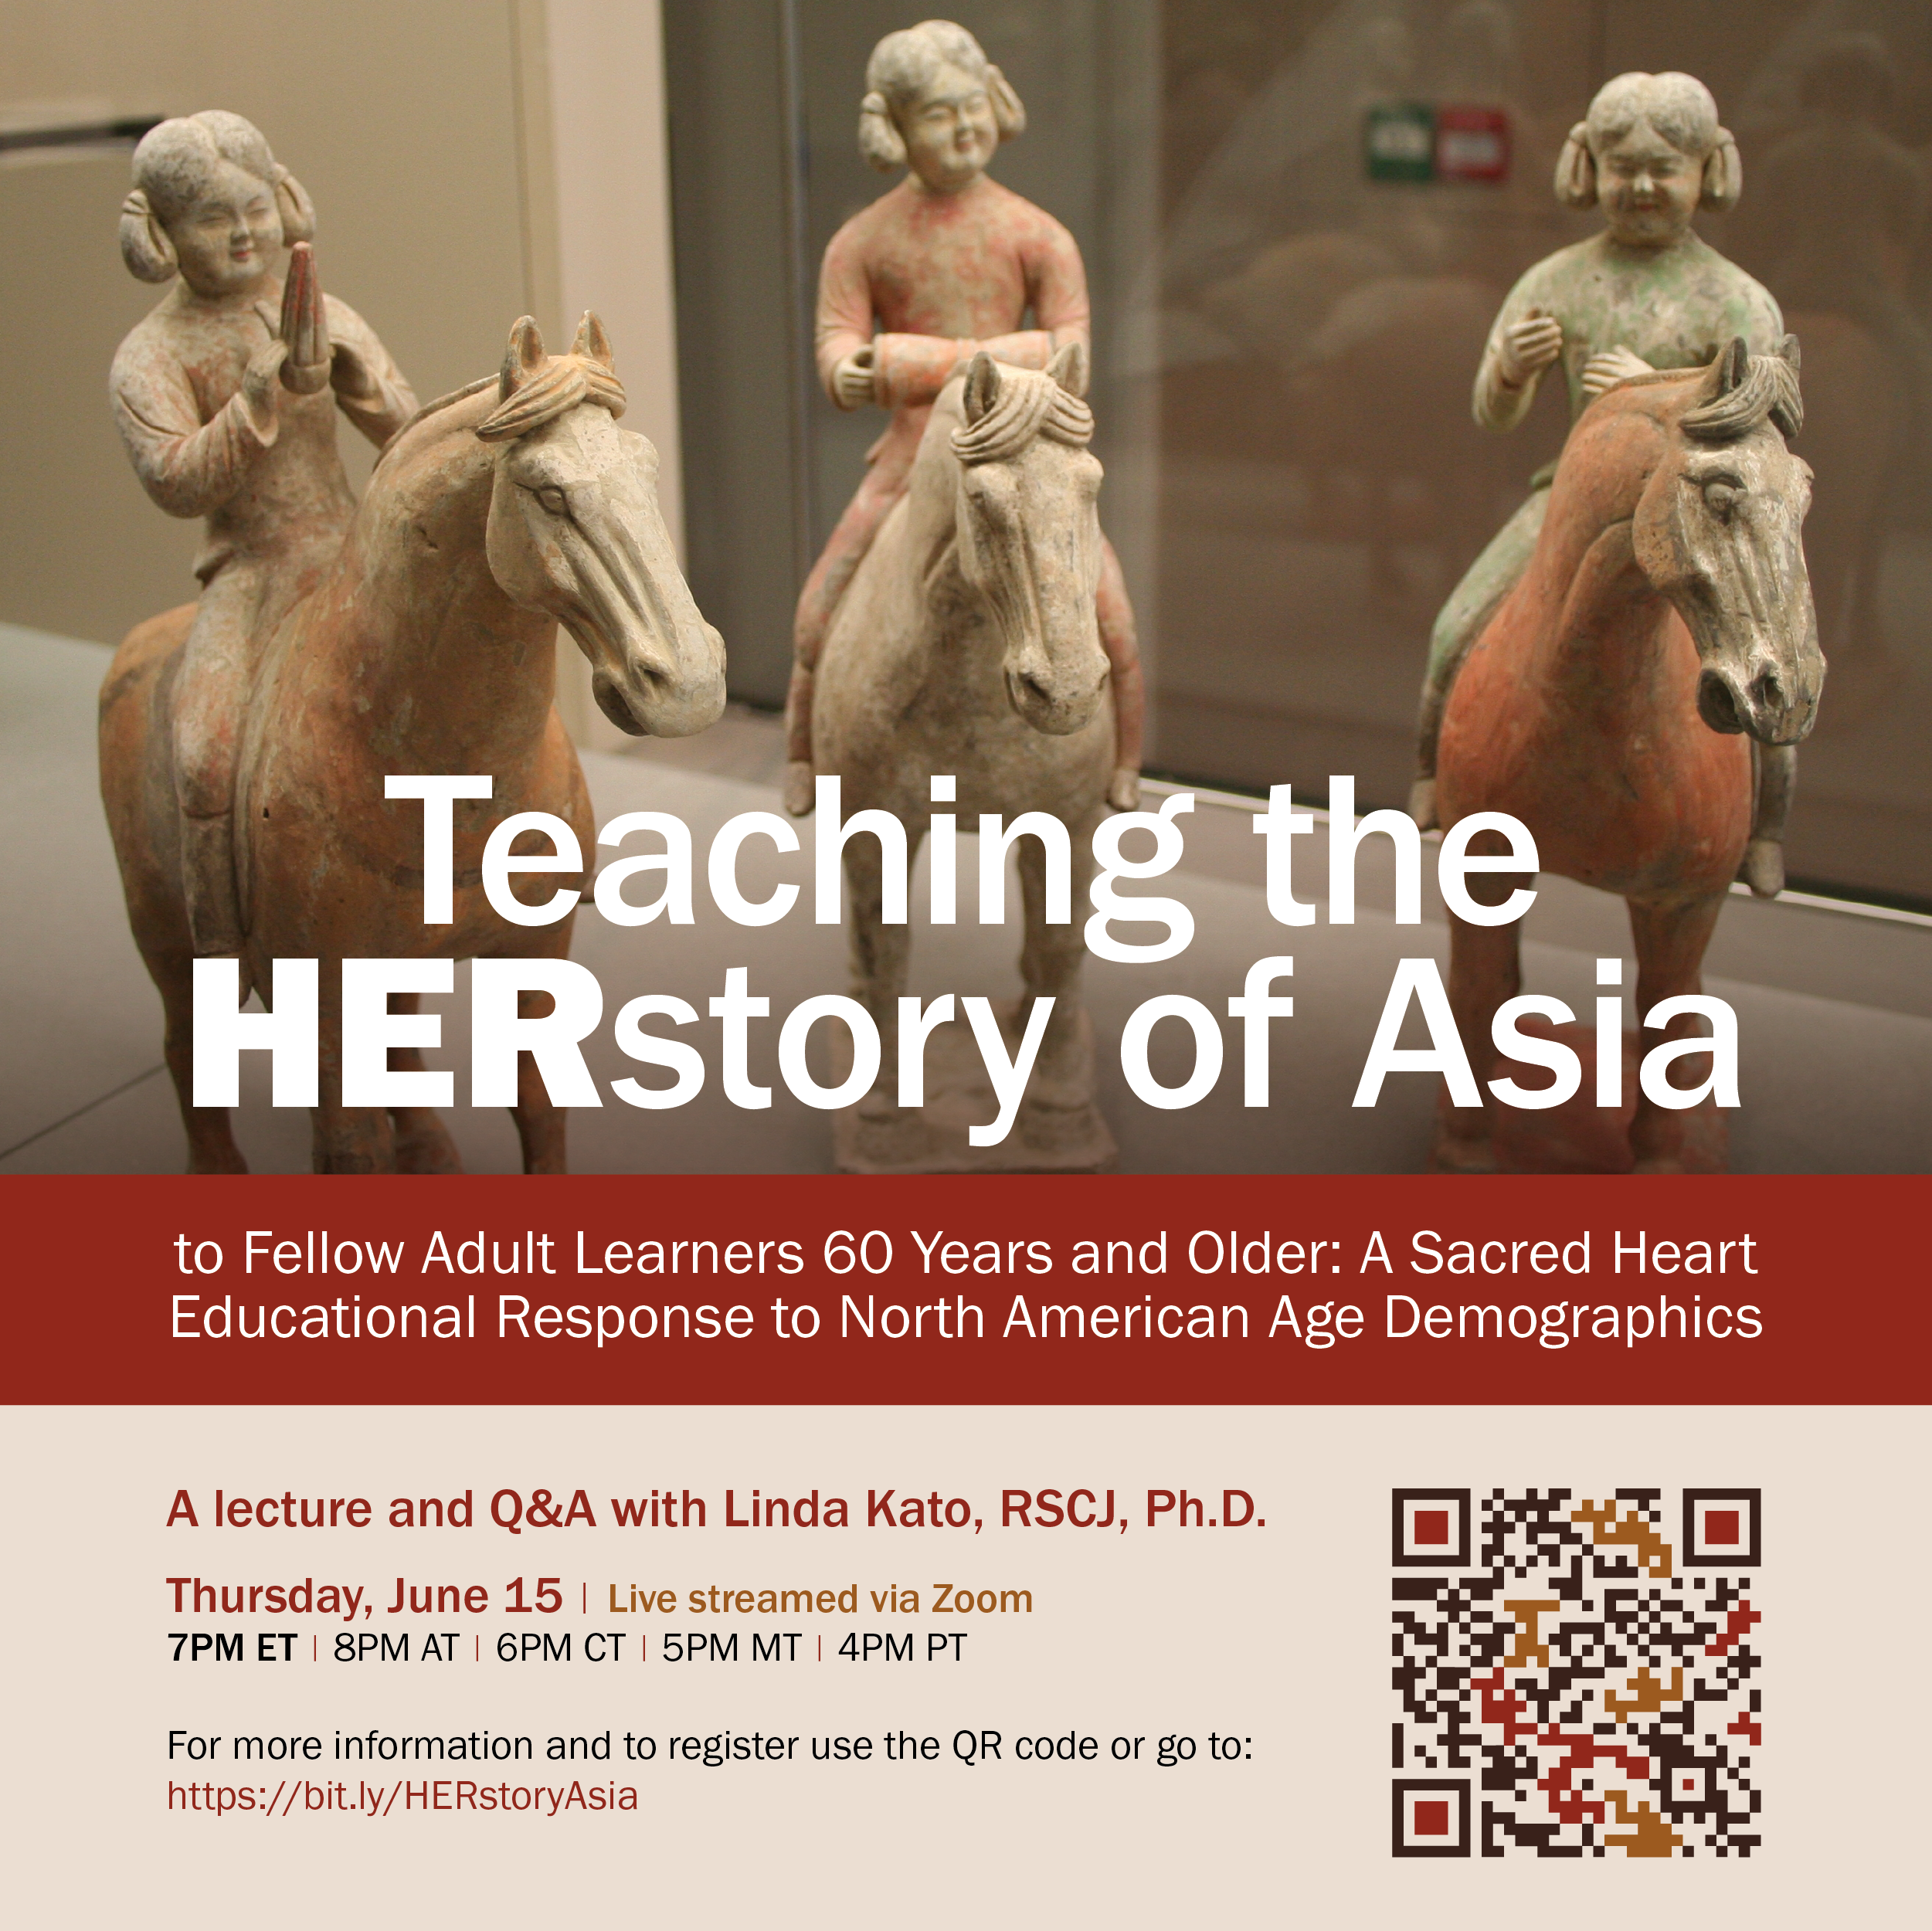 Promo image for "Teaching the HERstory of Asia"